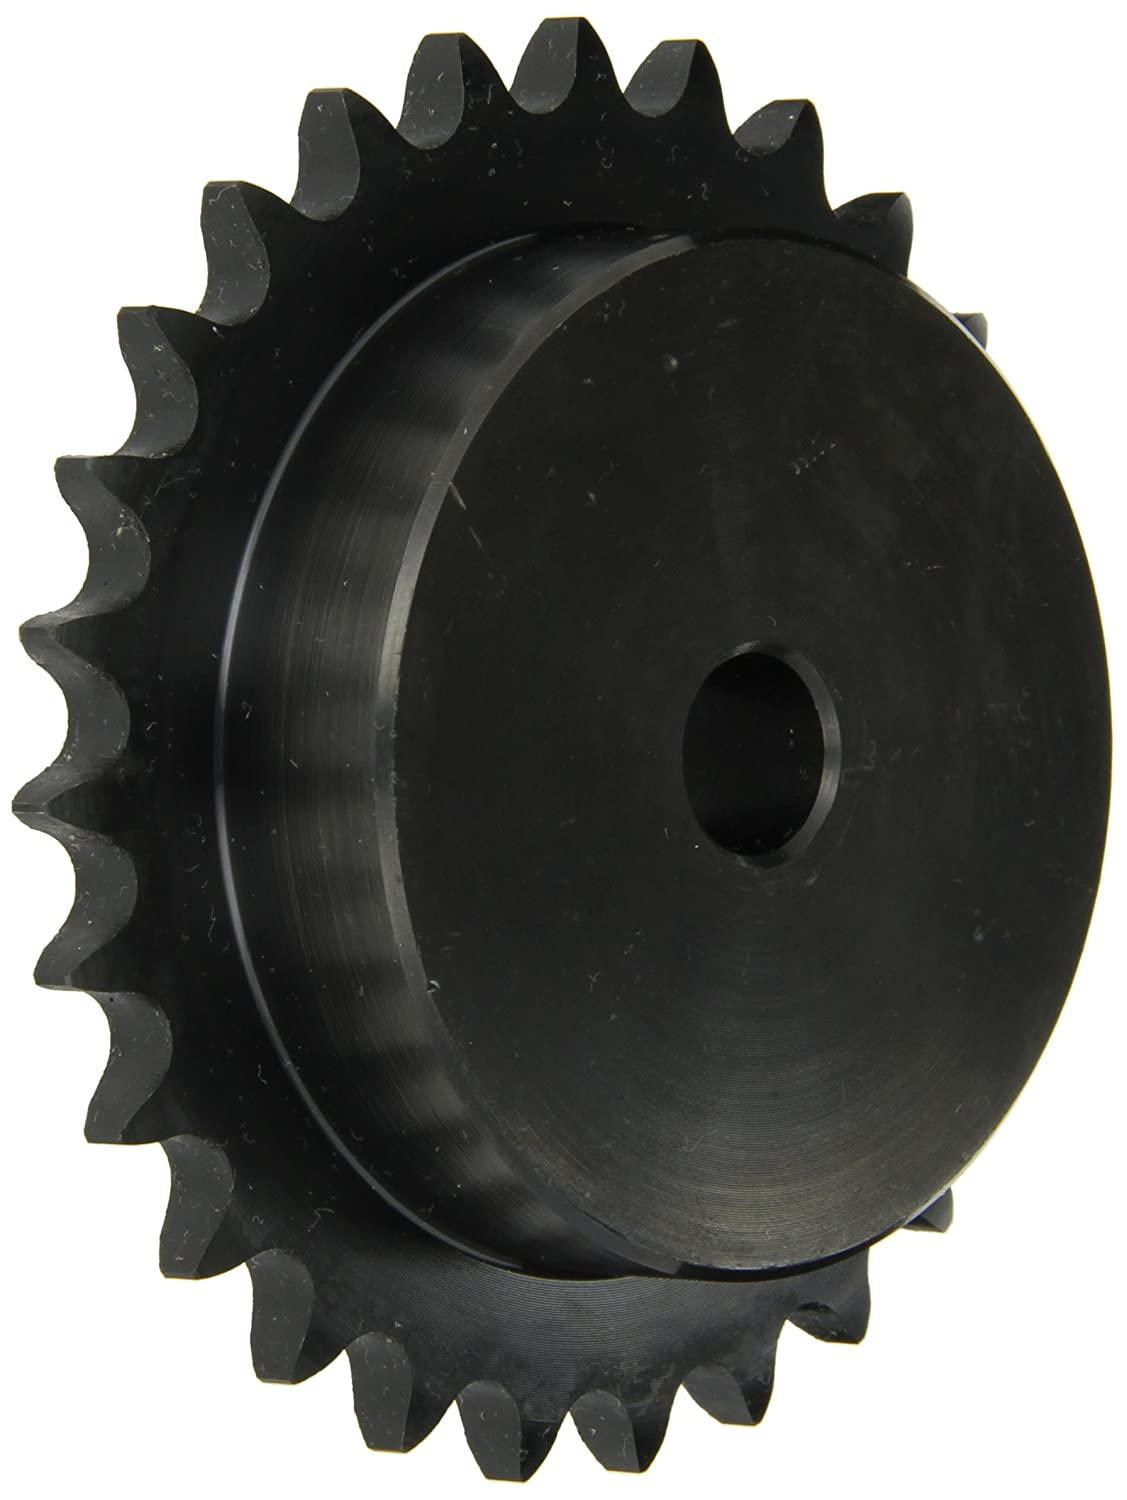 100B23 Roller Chain Sprocket With Stock Bore - Forces Inc